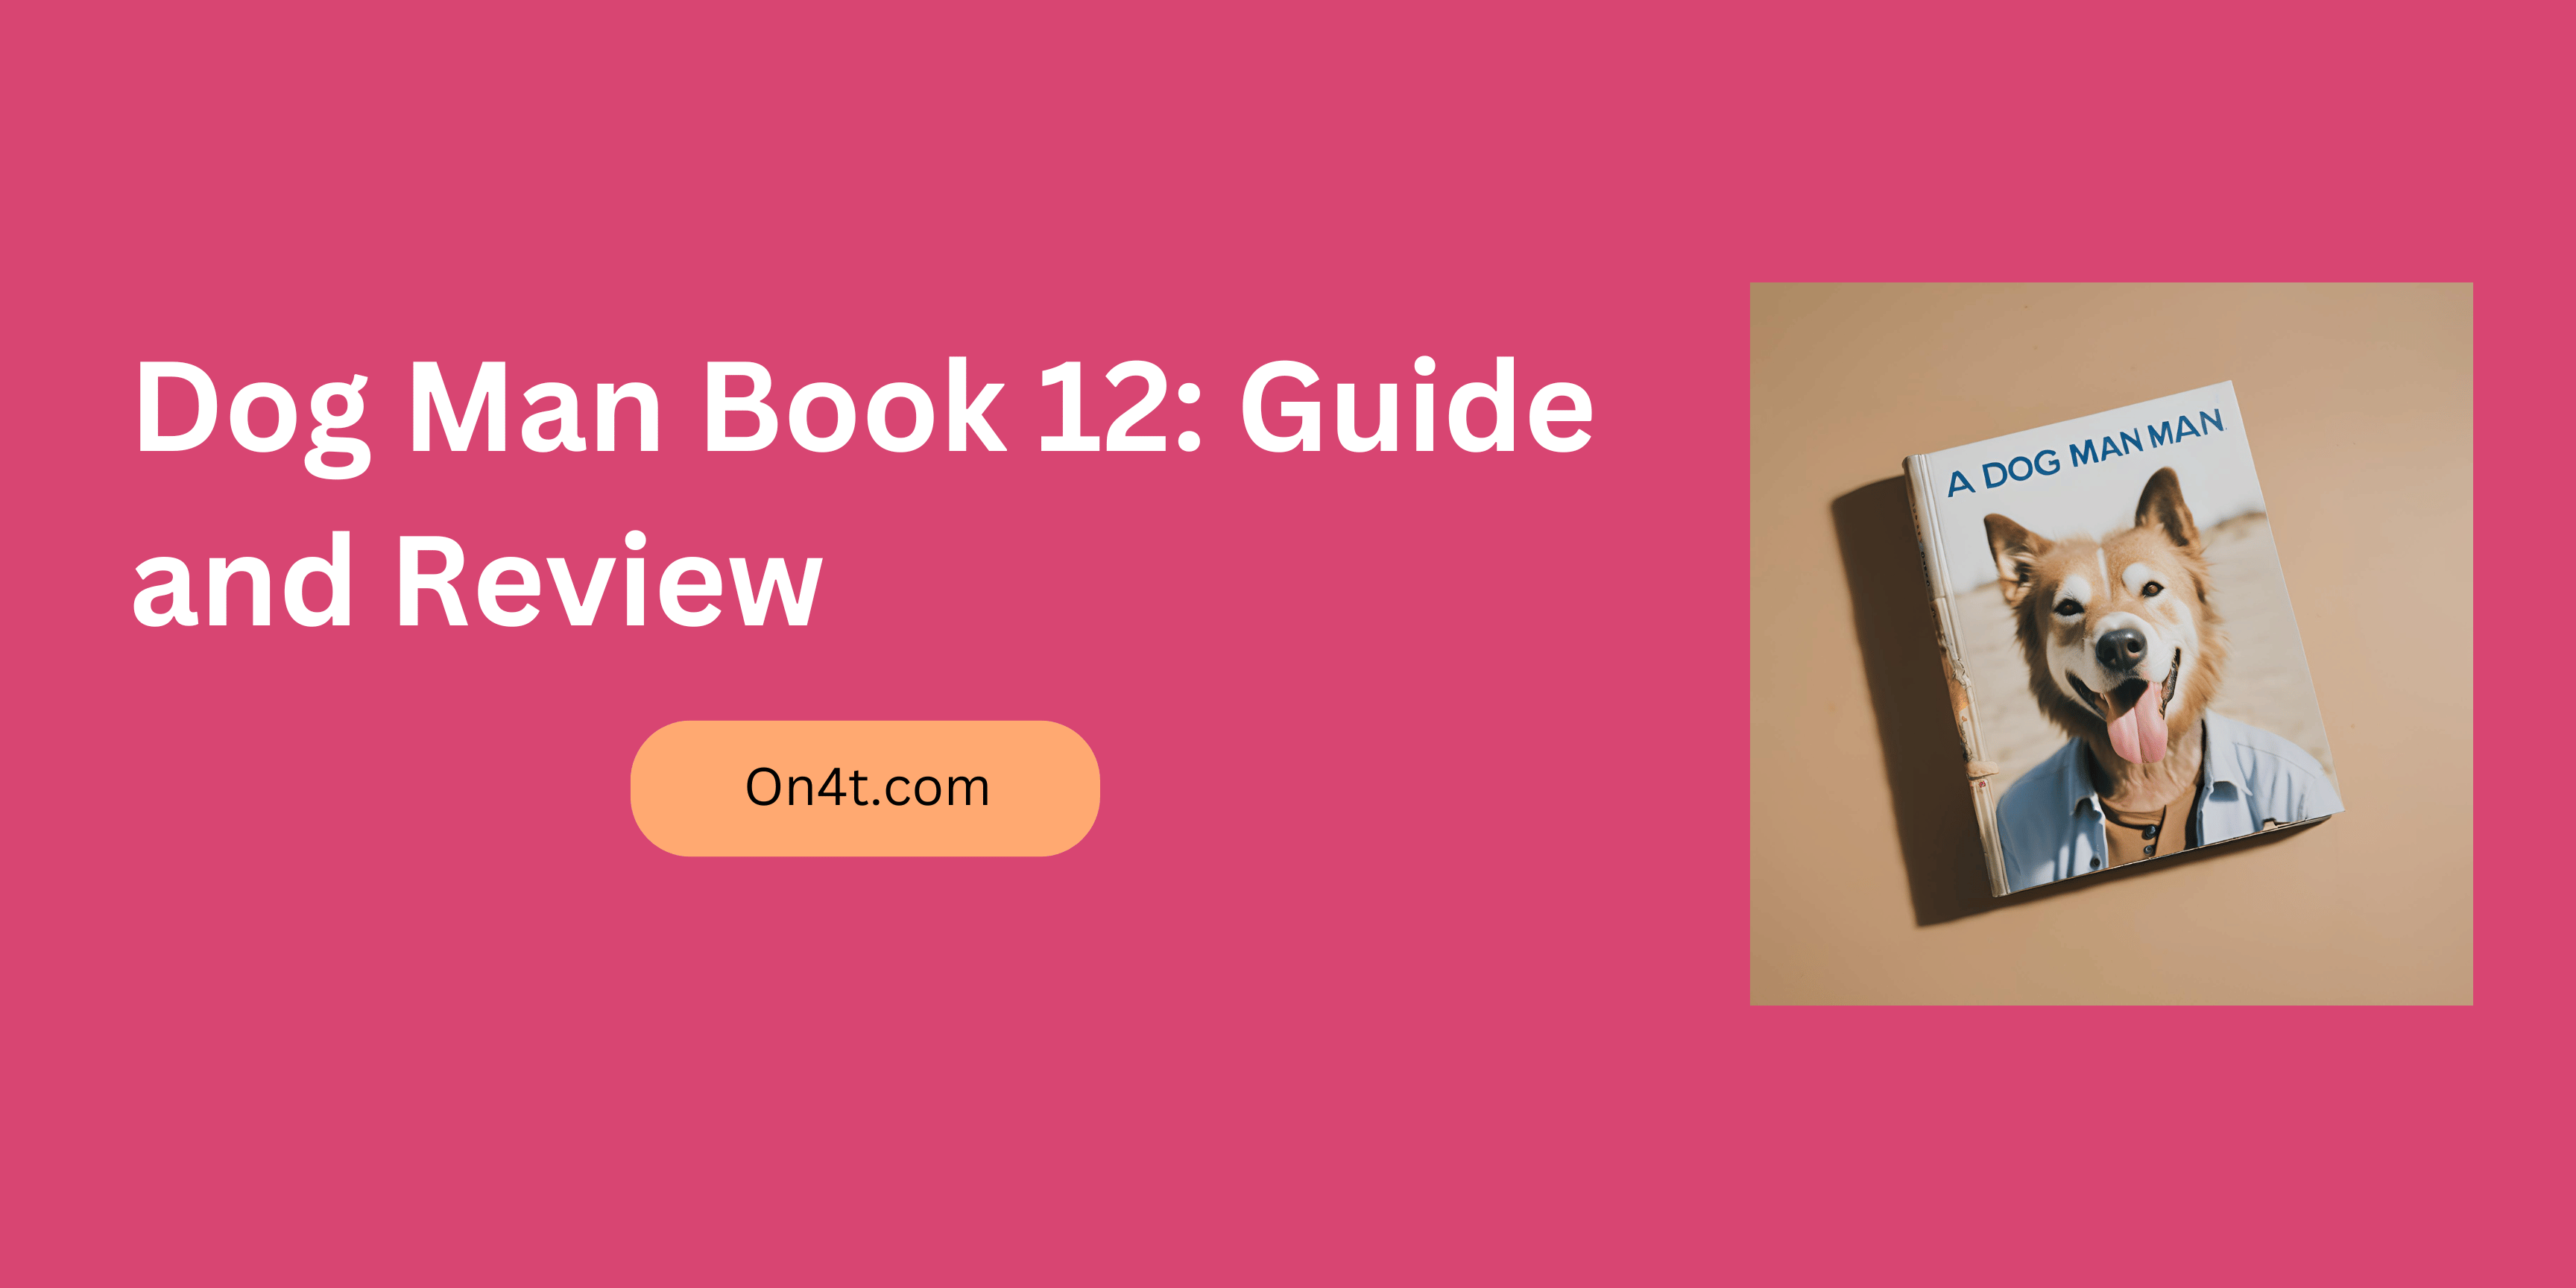 Dog Man Book 12: Guide and Review